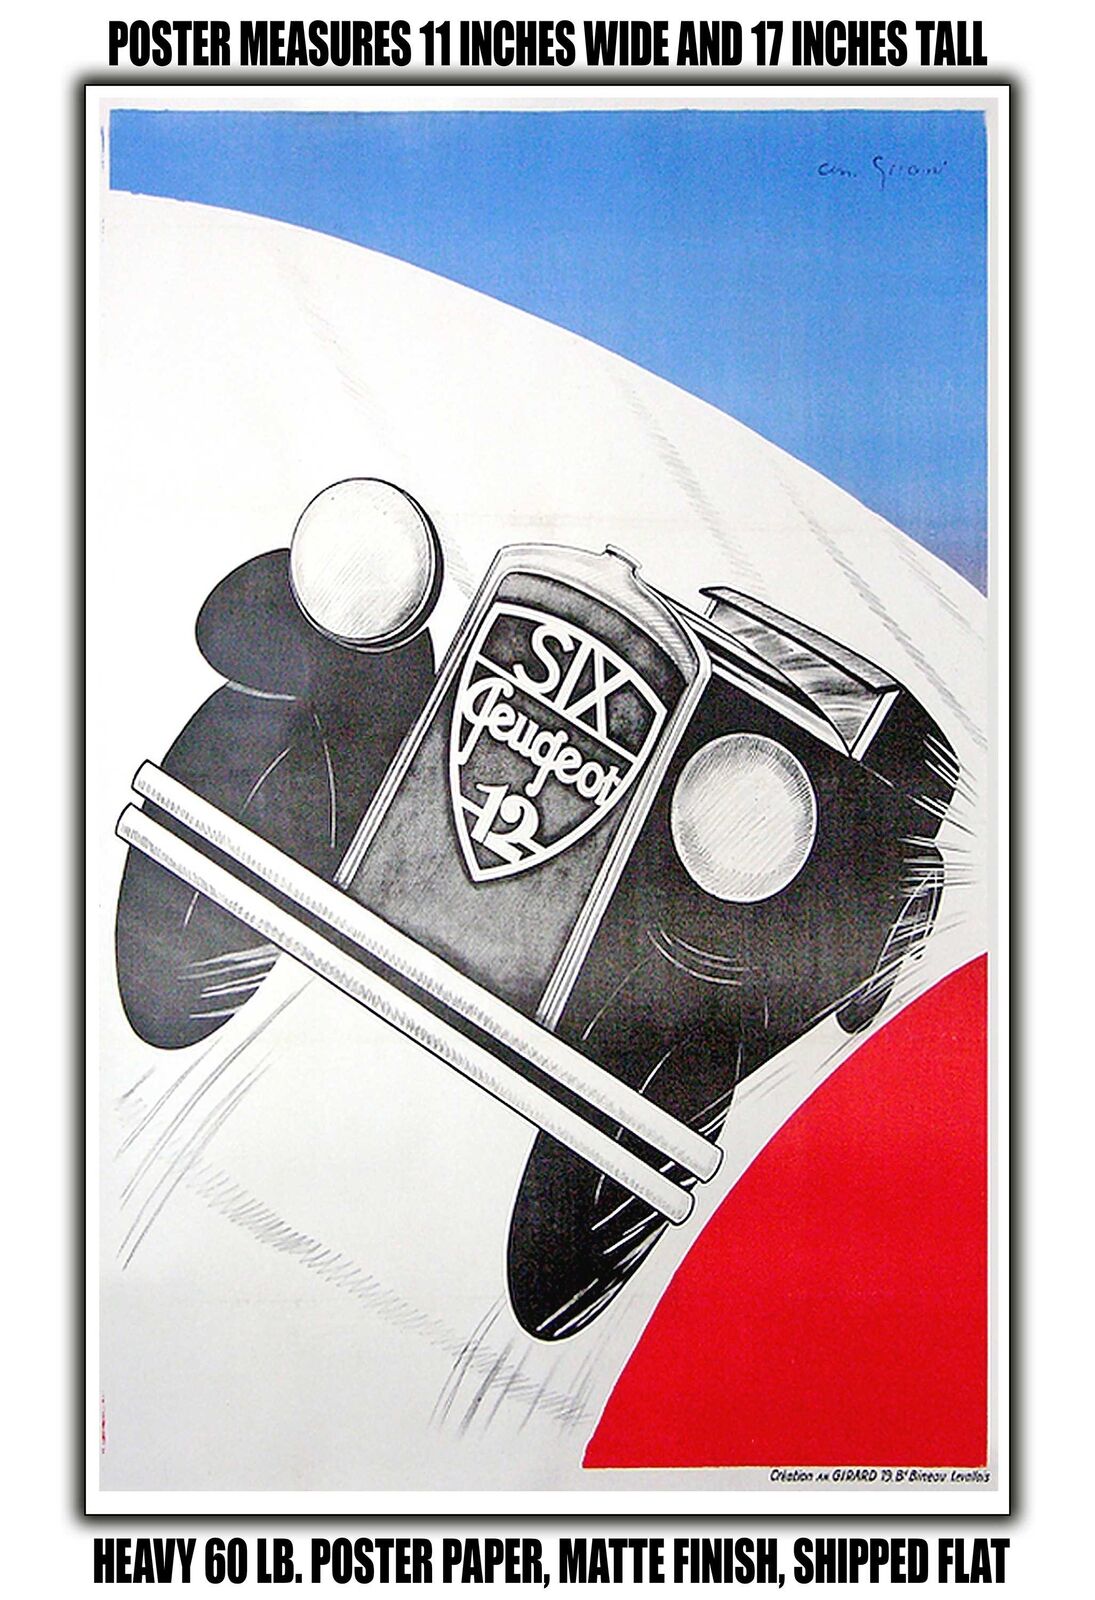 11x17 POSTER - 1934 Peugeot Six 12 by Andre Girond